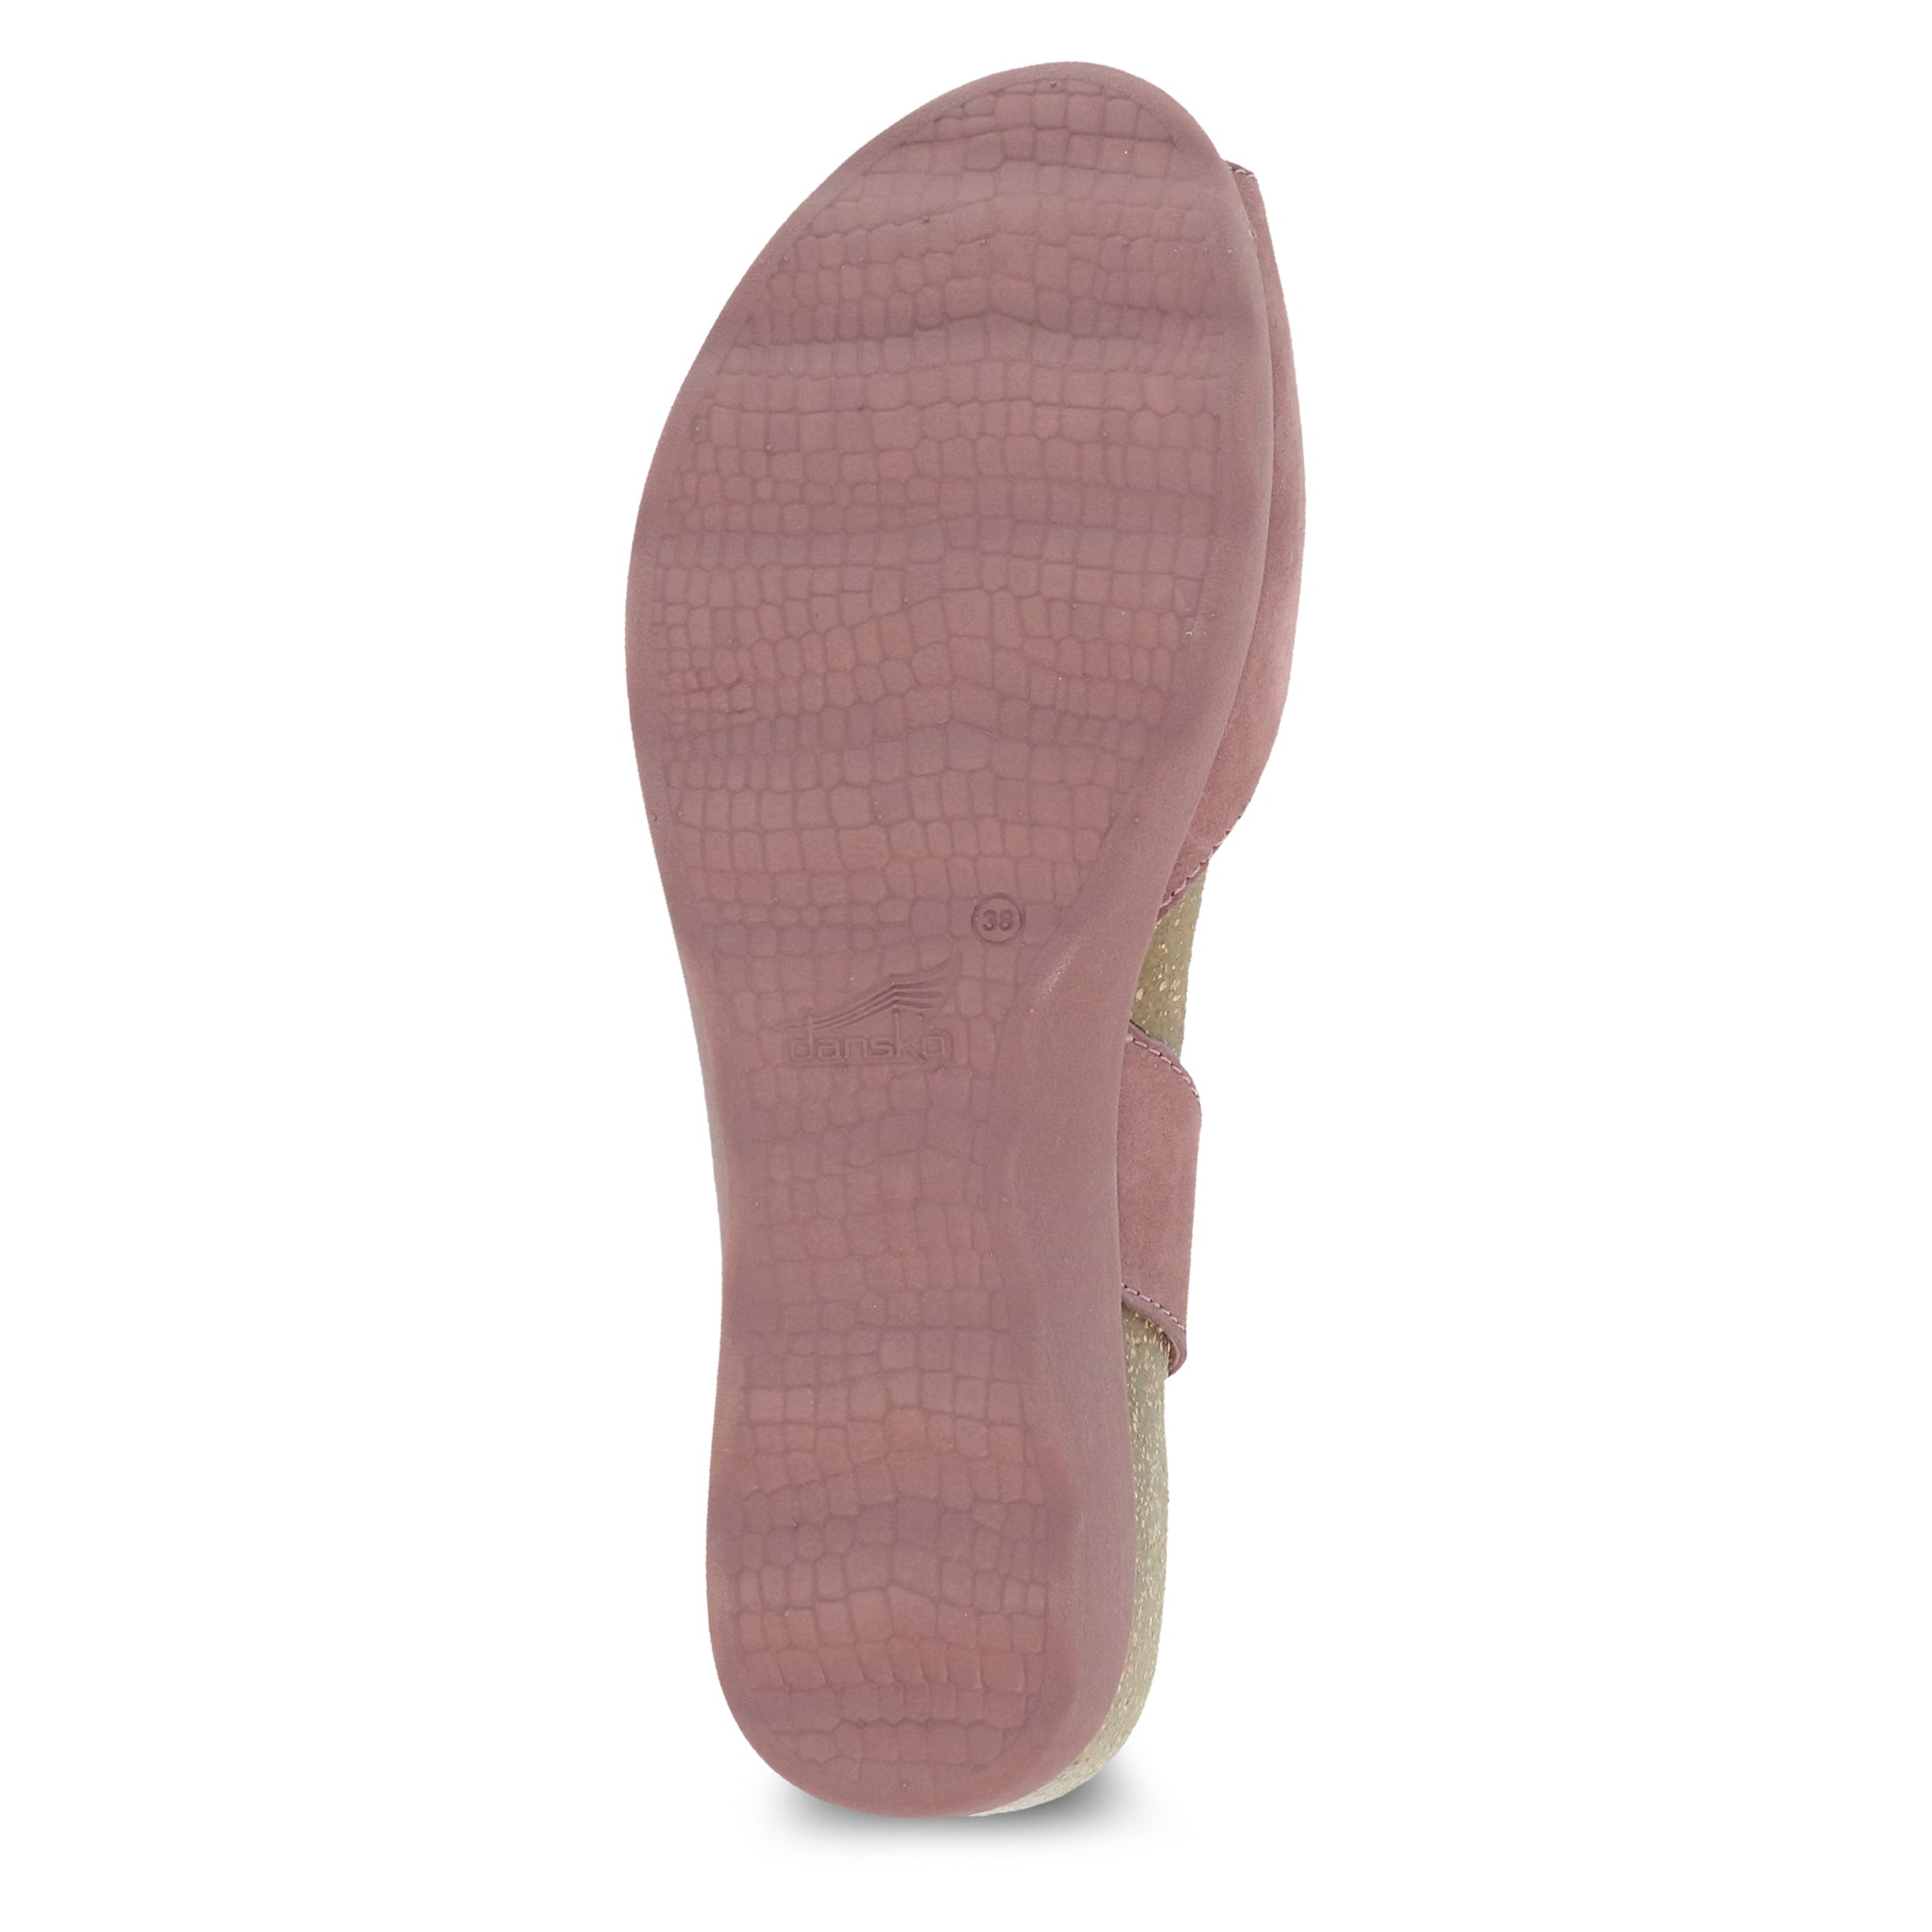 Sole image of Marcy Rose Milled Nubuck